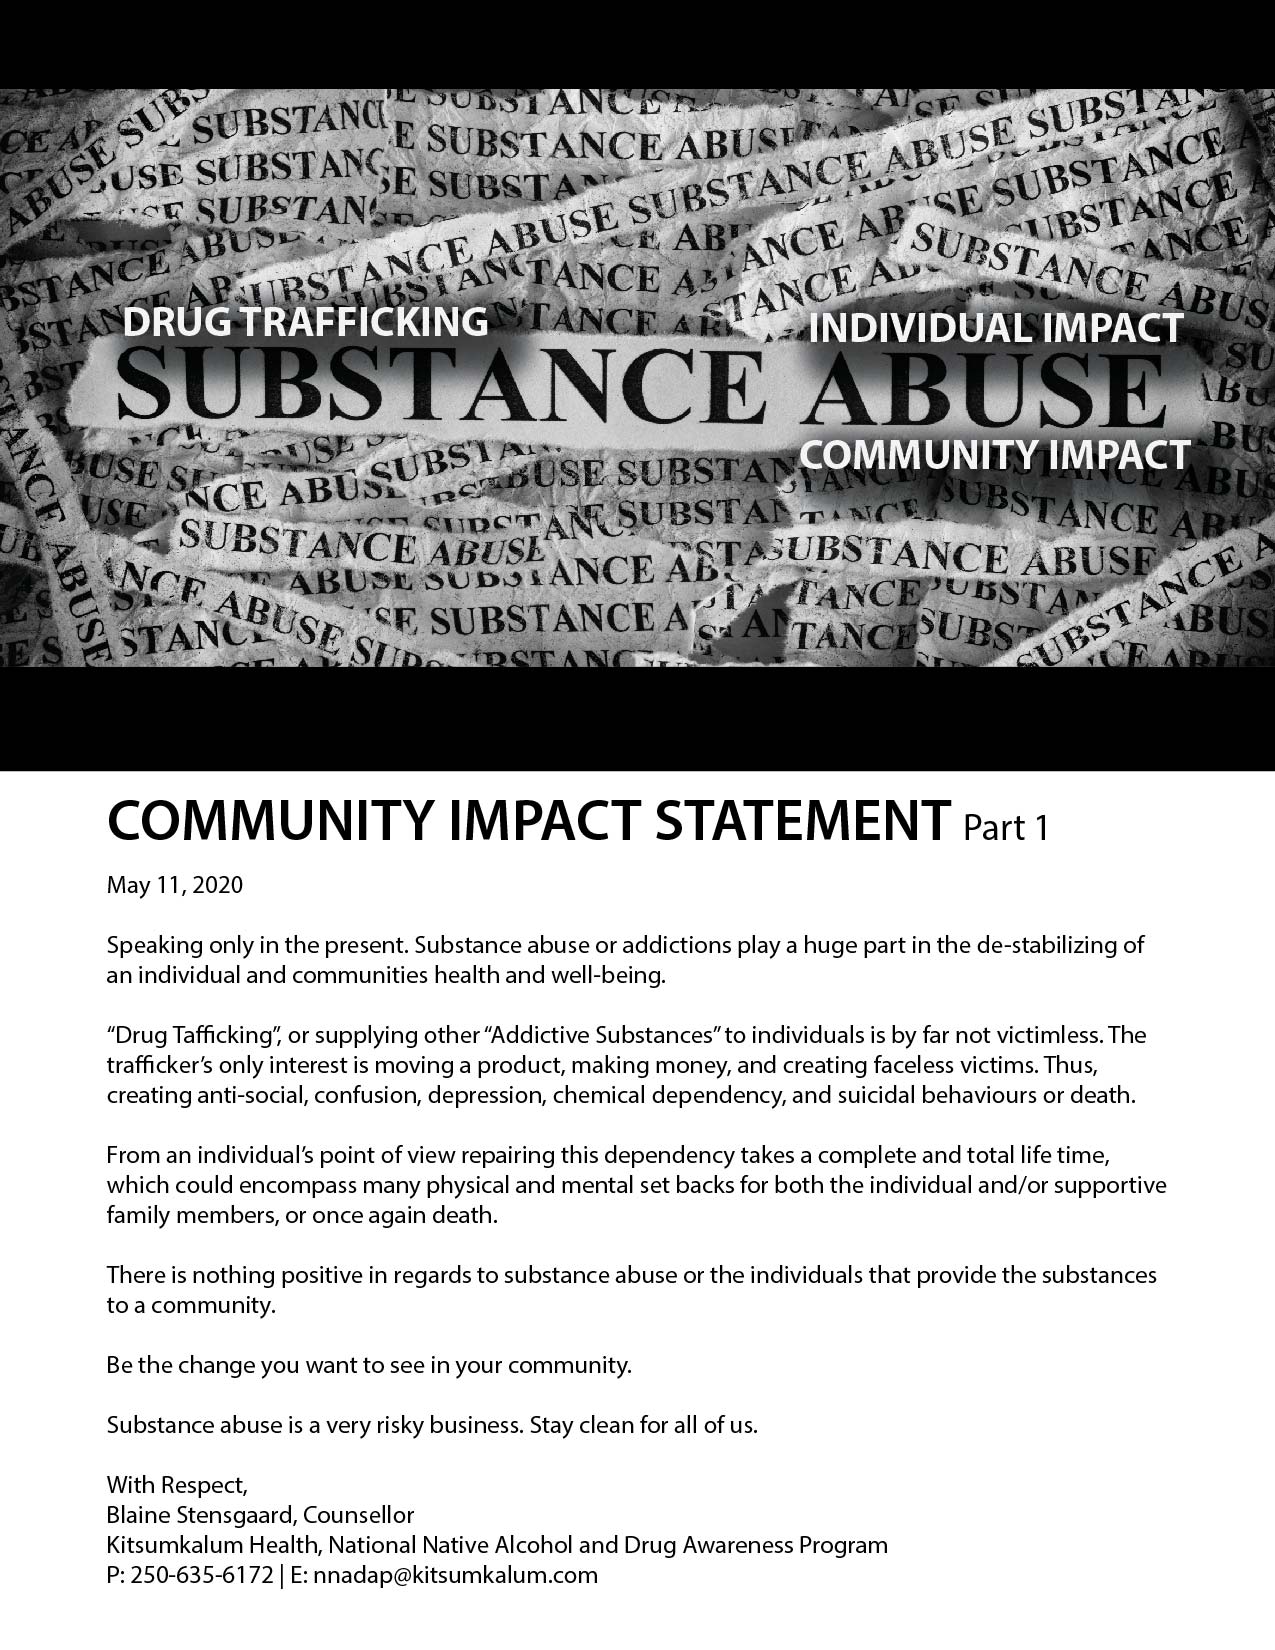 Community Impact Statement Part 1 – Substance Abuse and Drug Trafficking